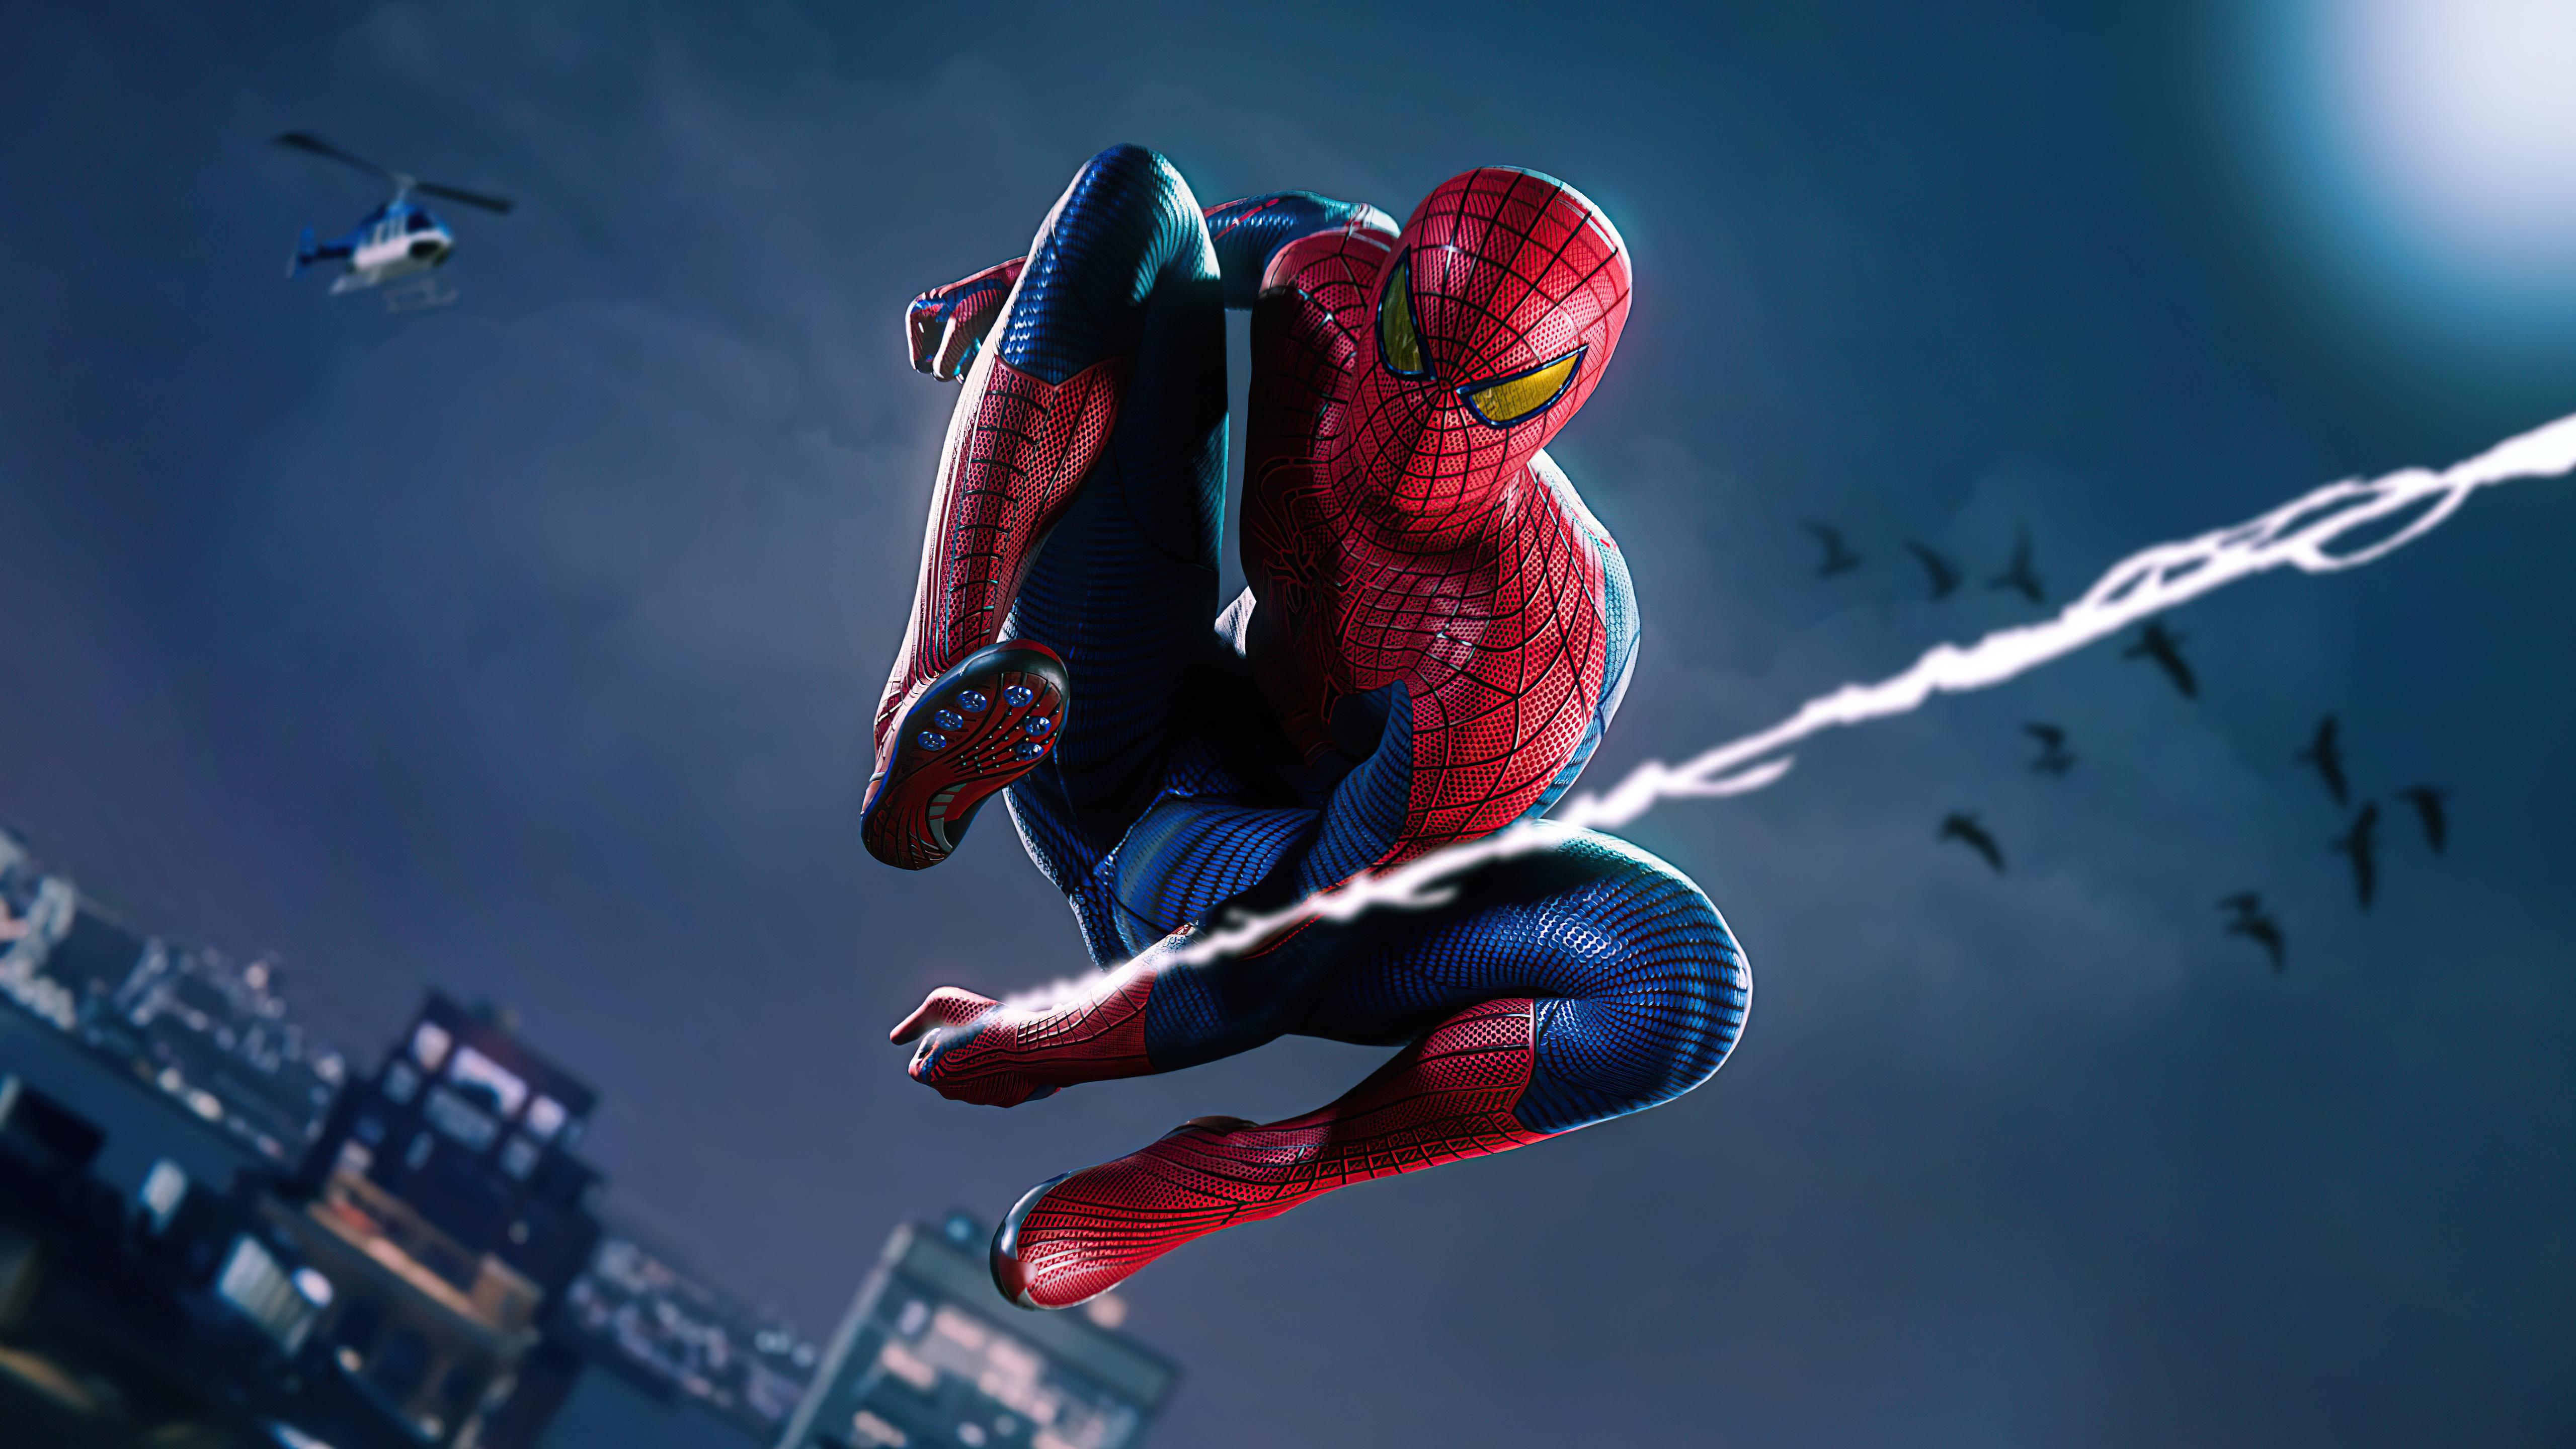 Marvel's Spider-Man Remastered Update 1.007.002 Slings Out This May 6